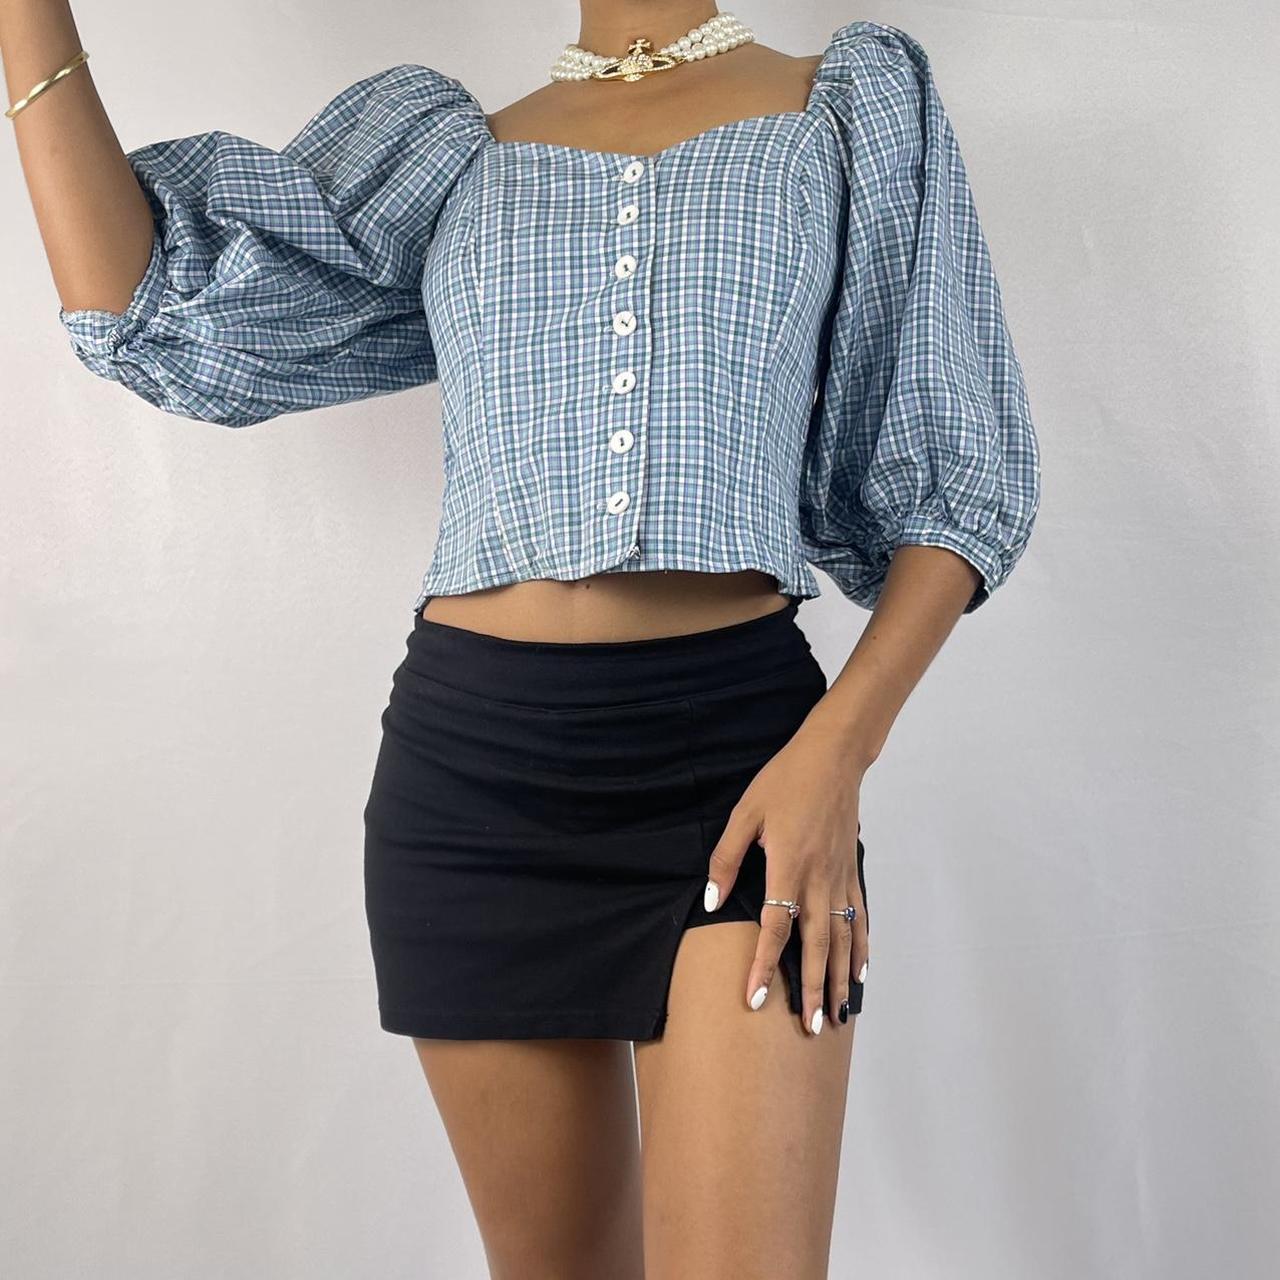 Product Image 3 - VINTAGE 90S MILKMAID TOP

ABOUT THE